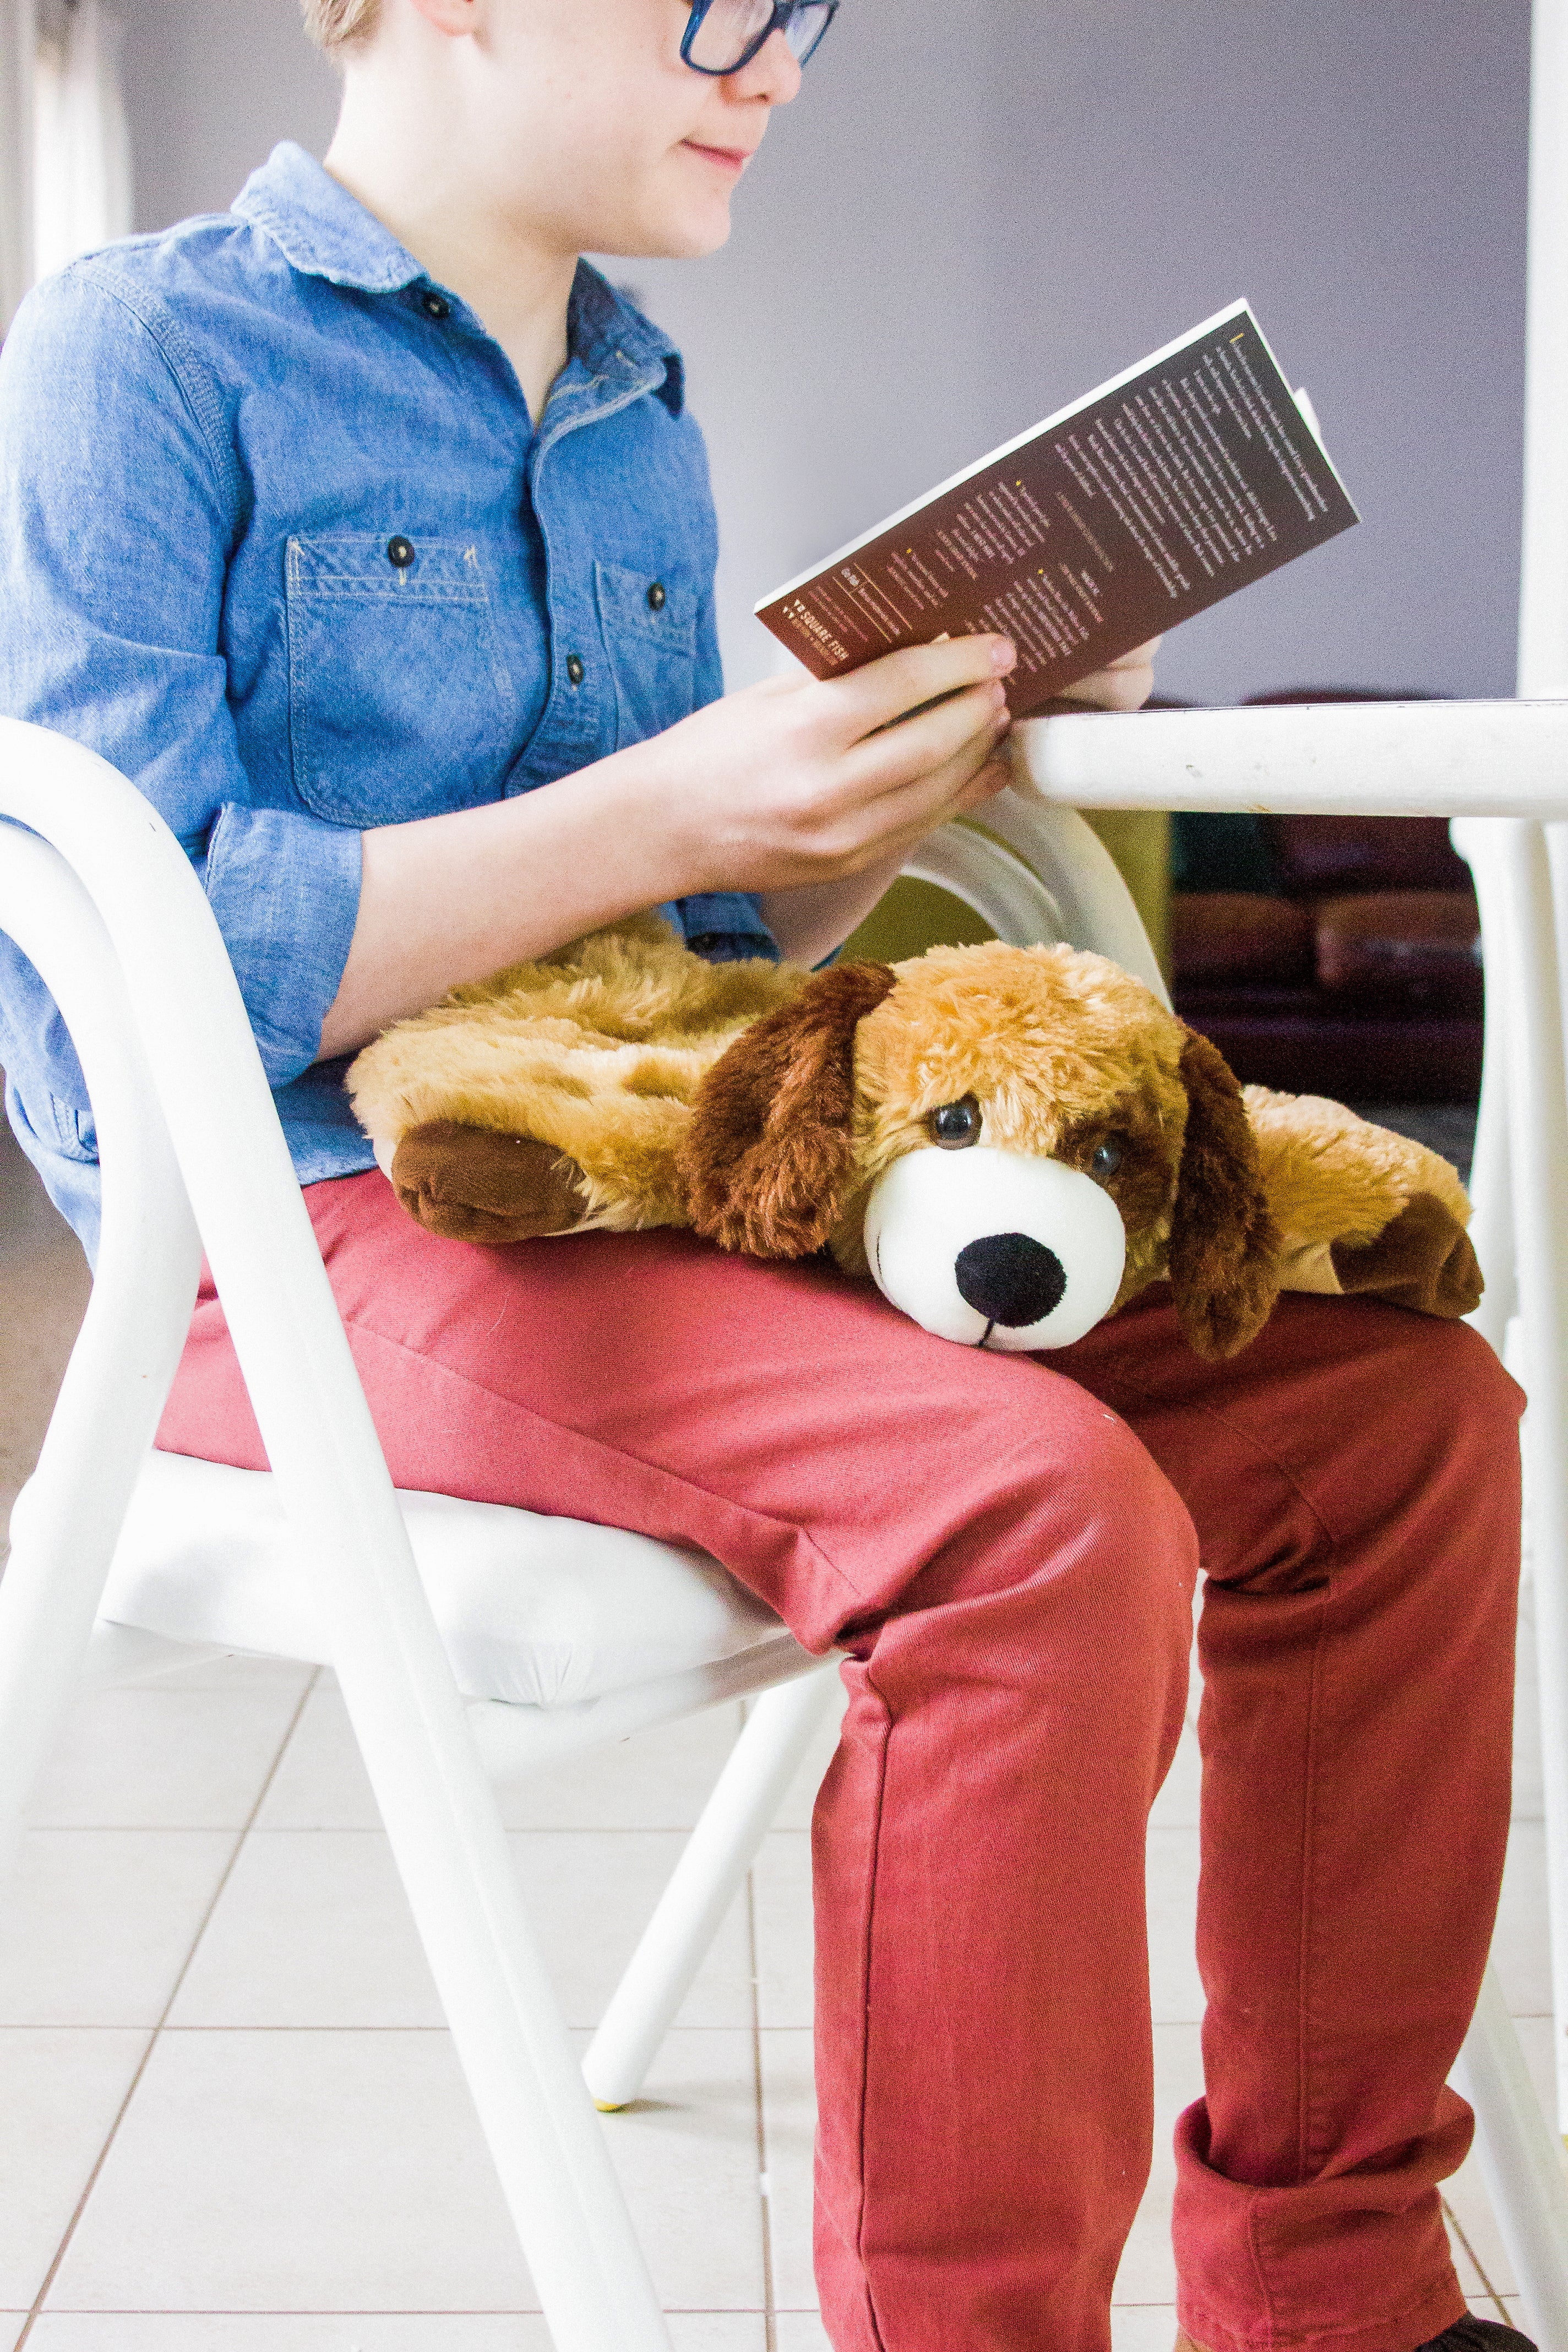 A child with light skin tone and glasses is sitting on a chair and holding open a book. The Weighted Lap Dog is sitting on their lap.